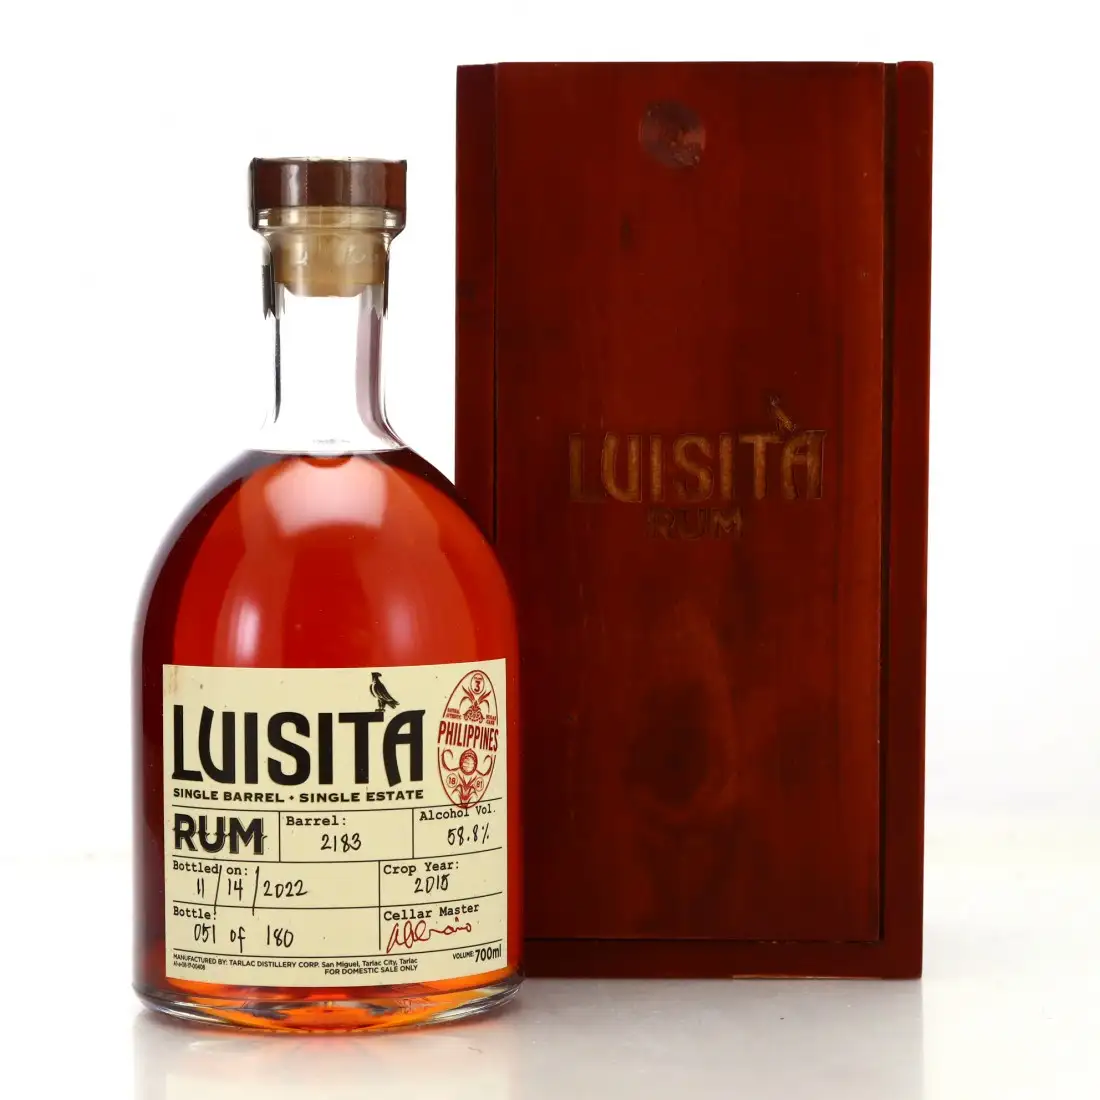 Image of the front of the bottle of the rum Luisita Single Barrel Single Estate